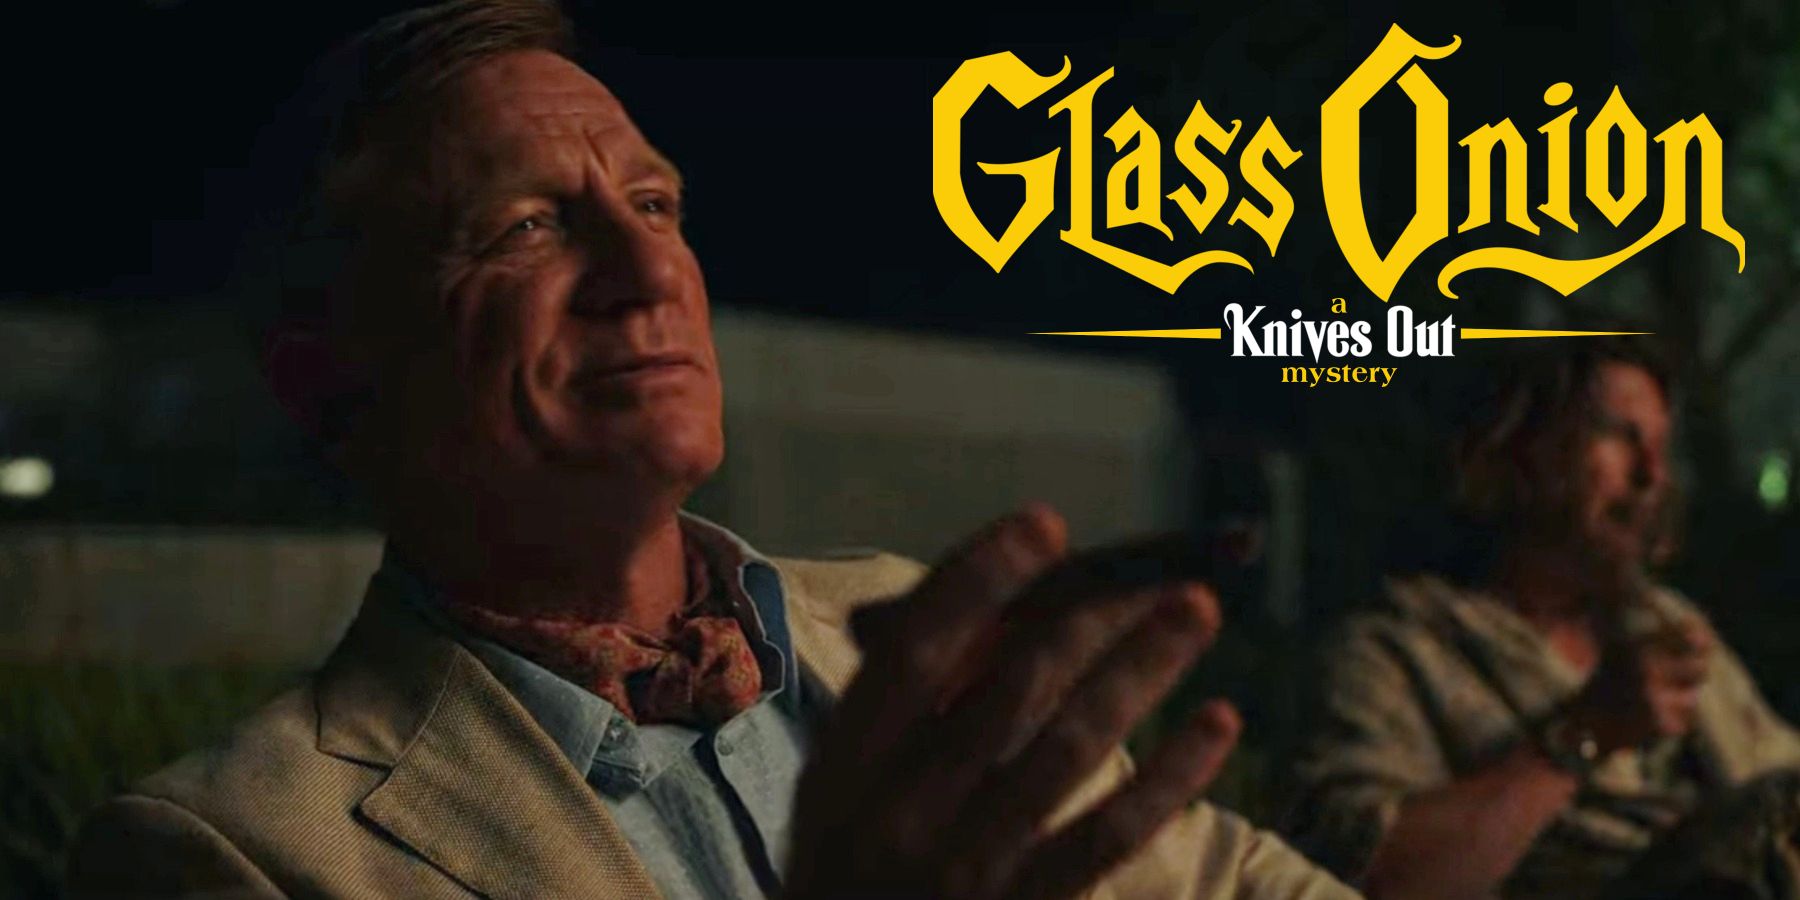 Daniel Craig as Benoit Blanc celebrating with Knives Out: A Glass Onion Mystery logo